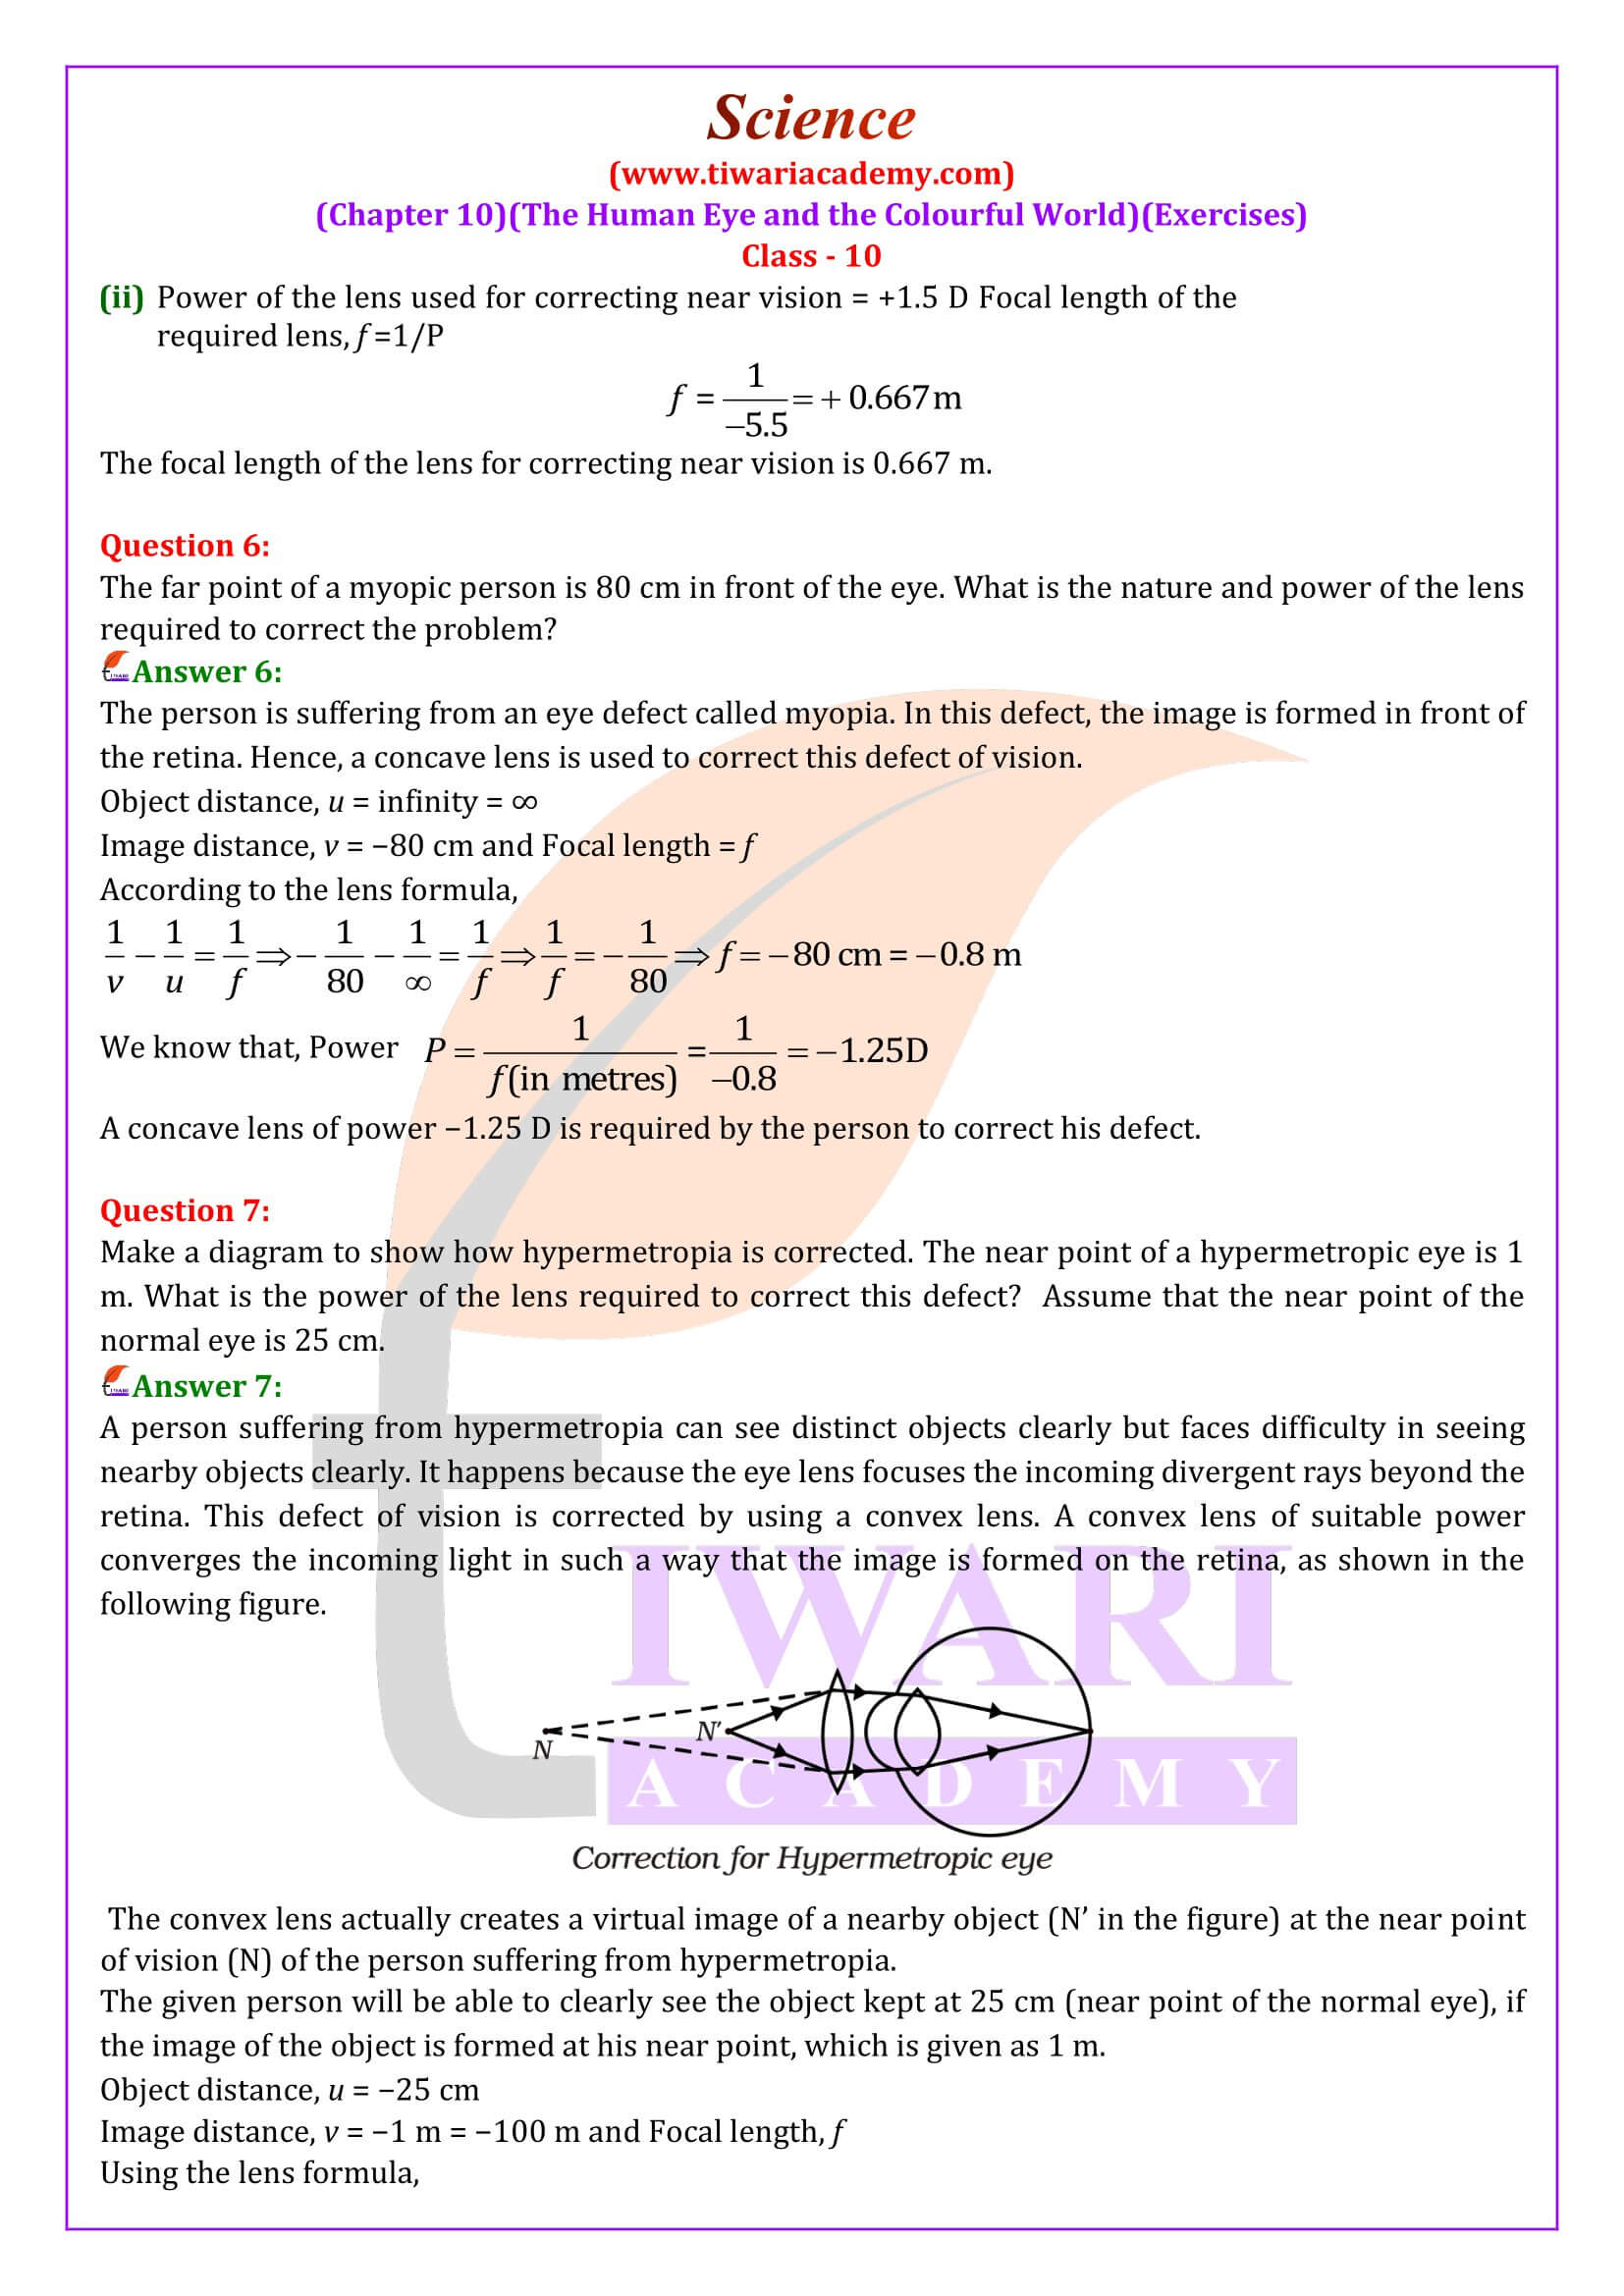 NCERT Solutions for Class 10 Science Chapter 10